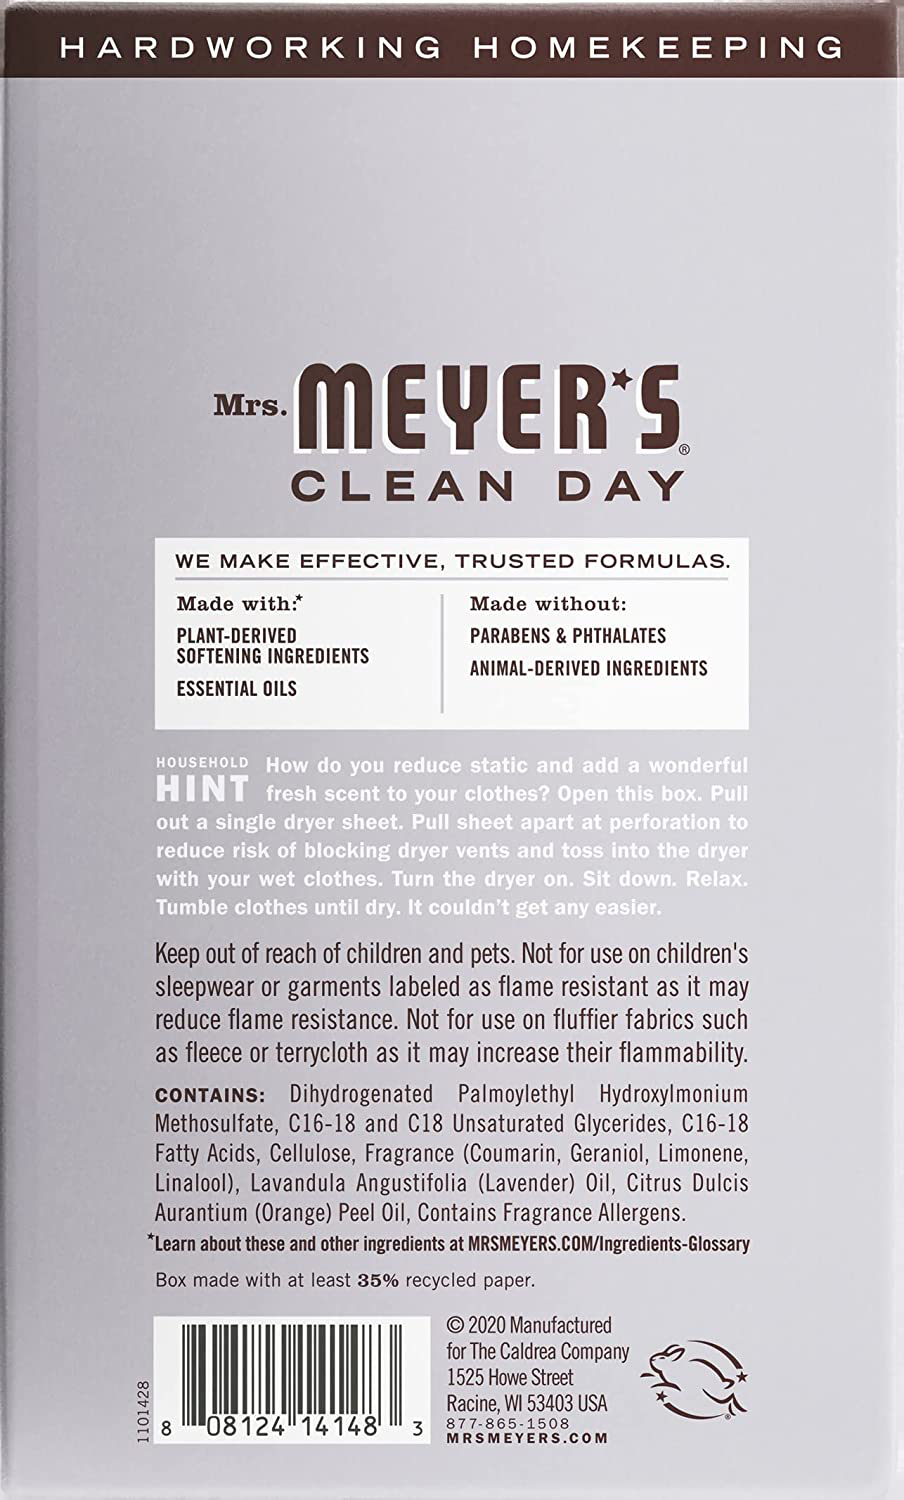 Mrs. Meyer'S Clean Day Dryer Sheets, Fabric Softener, Reduces Static, Cruelty Free Formula Infused with Essential Oils, Lavender Scent, 80 Count